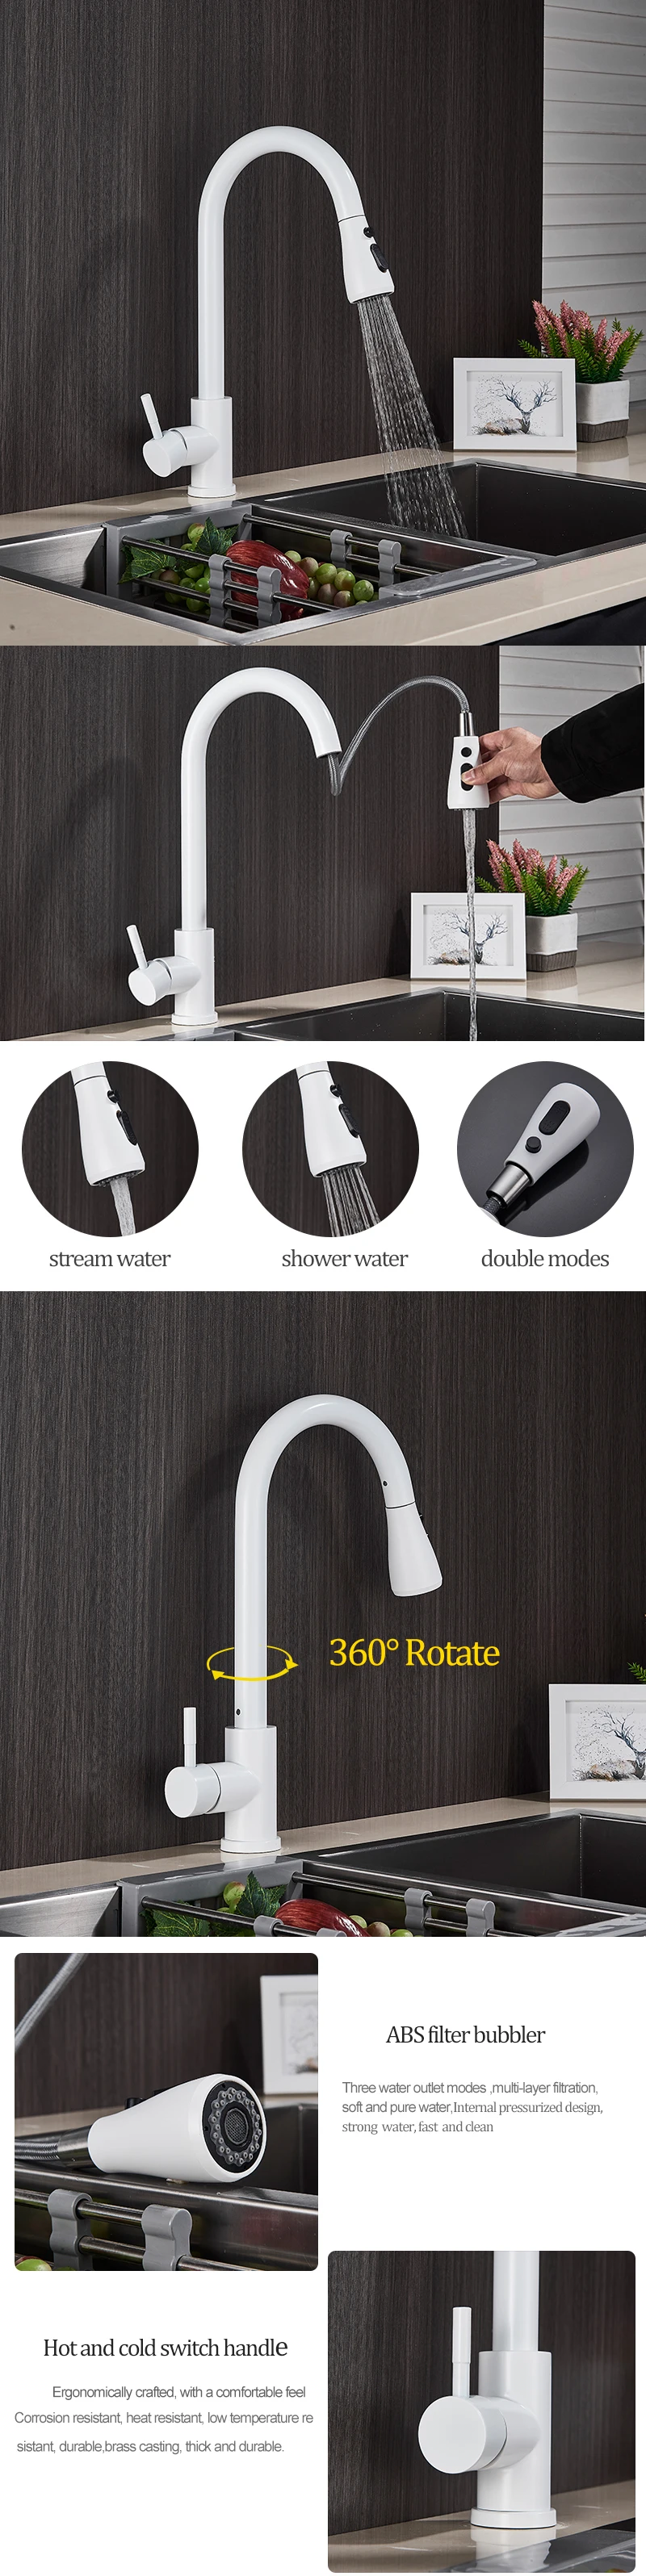 Senlesen White Kitchen Faucet Pull Out Kitchen Tap Two Water Outlet Modes Single Handle Deck Mounted Water Mixer Taps round kitchen sink